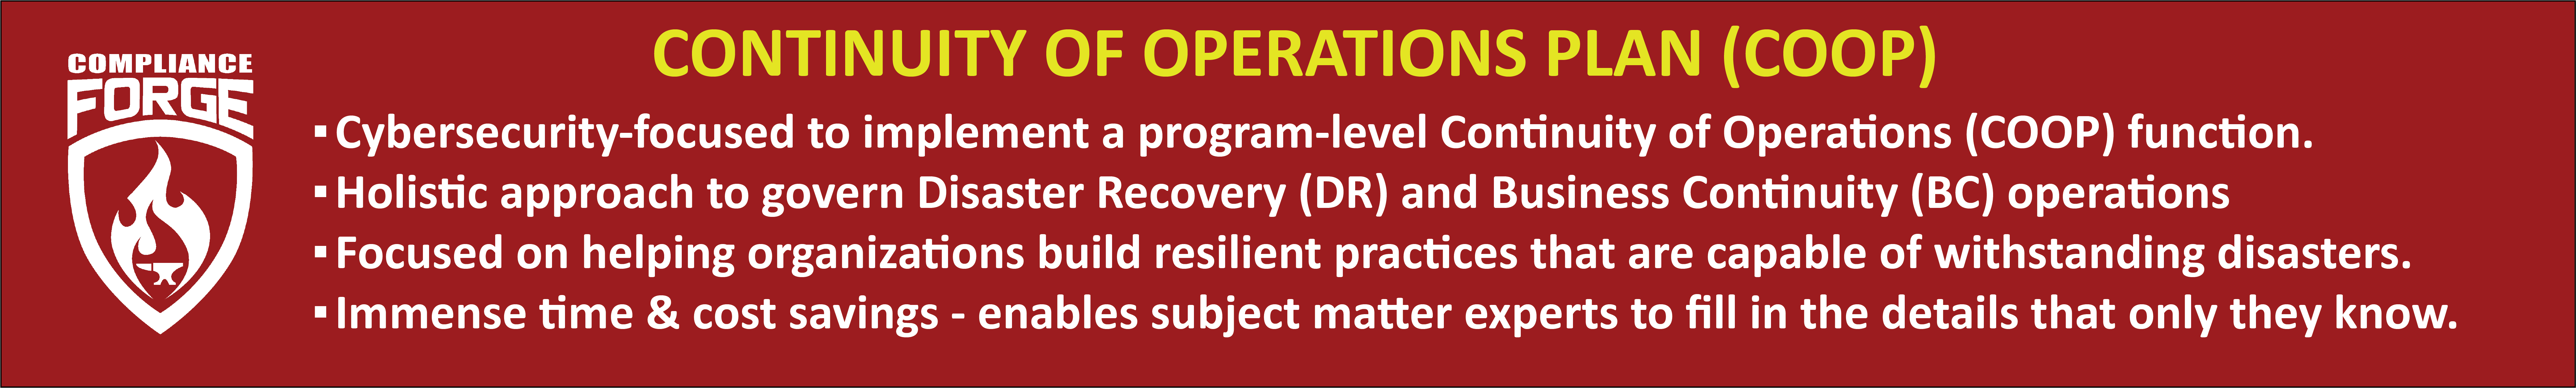 Continuity of Operations Plan (COOP) - Disaster Recovery & Business Continuity